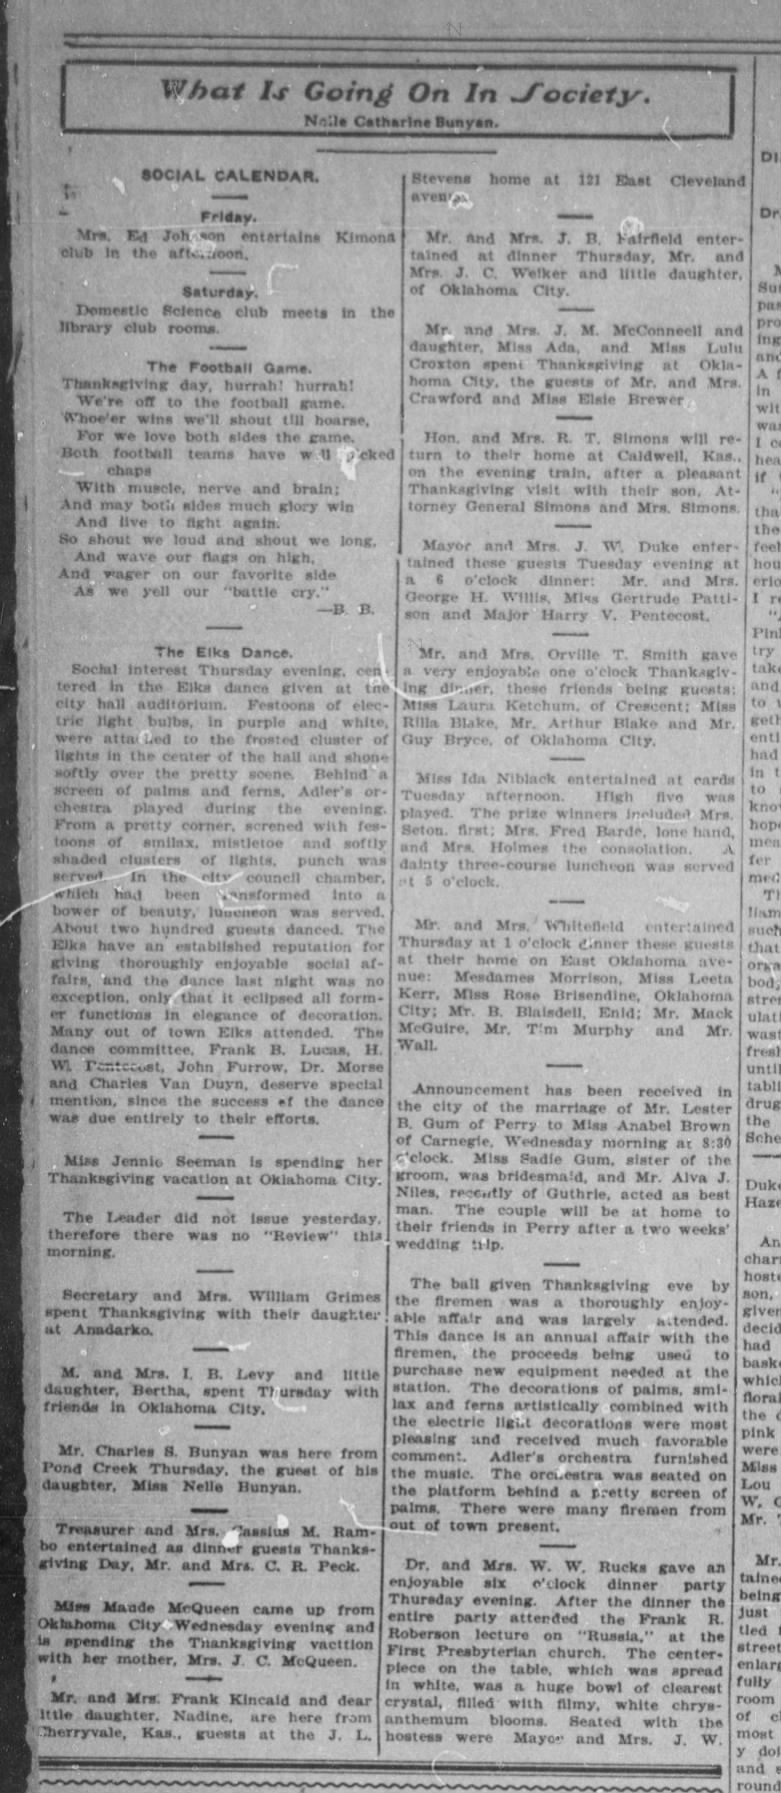 An early Nelle Catherine Bunyan society article; Guthrie Daily Leader, 1 Dec 1905, p. 5 